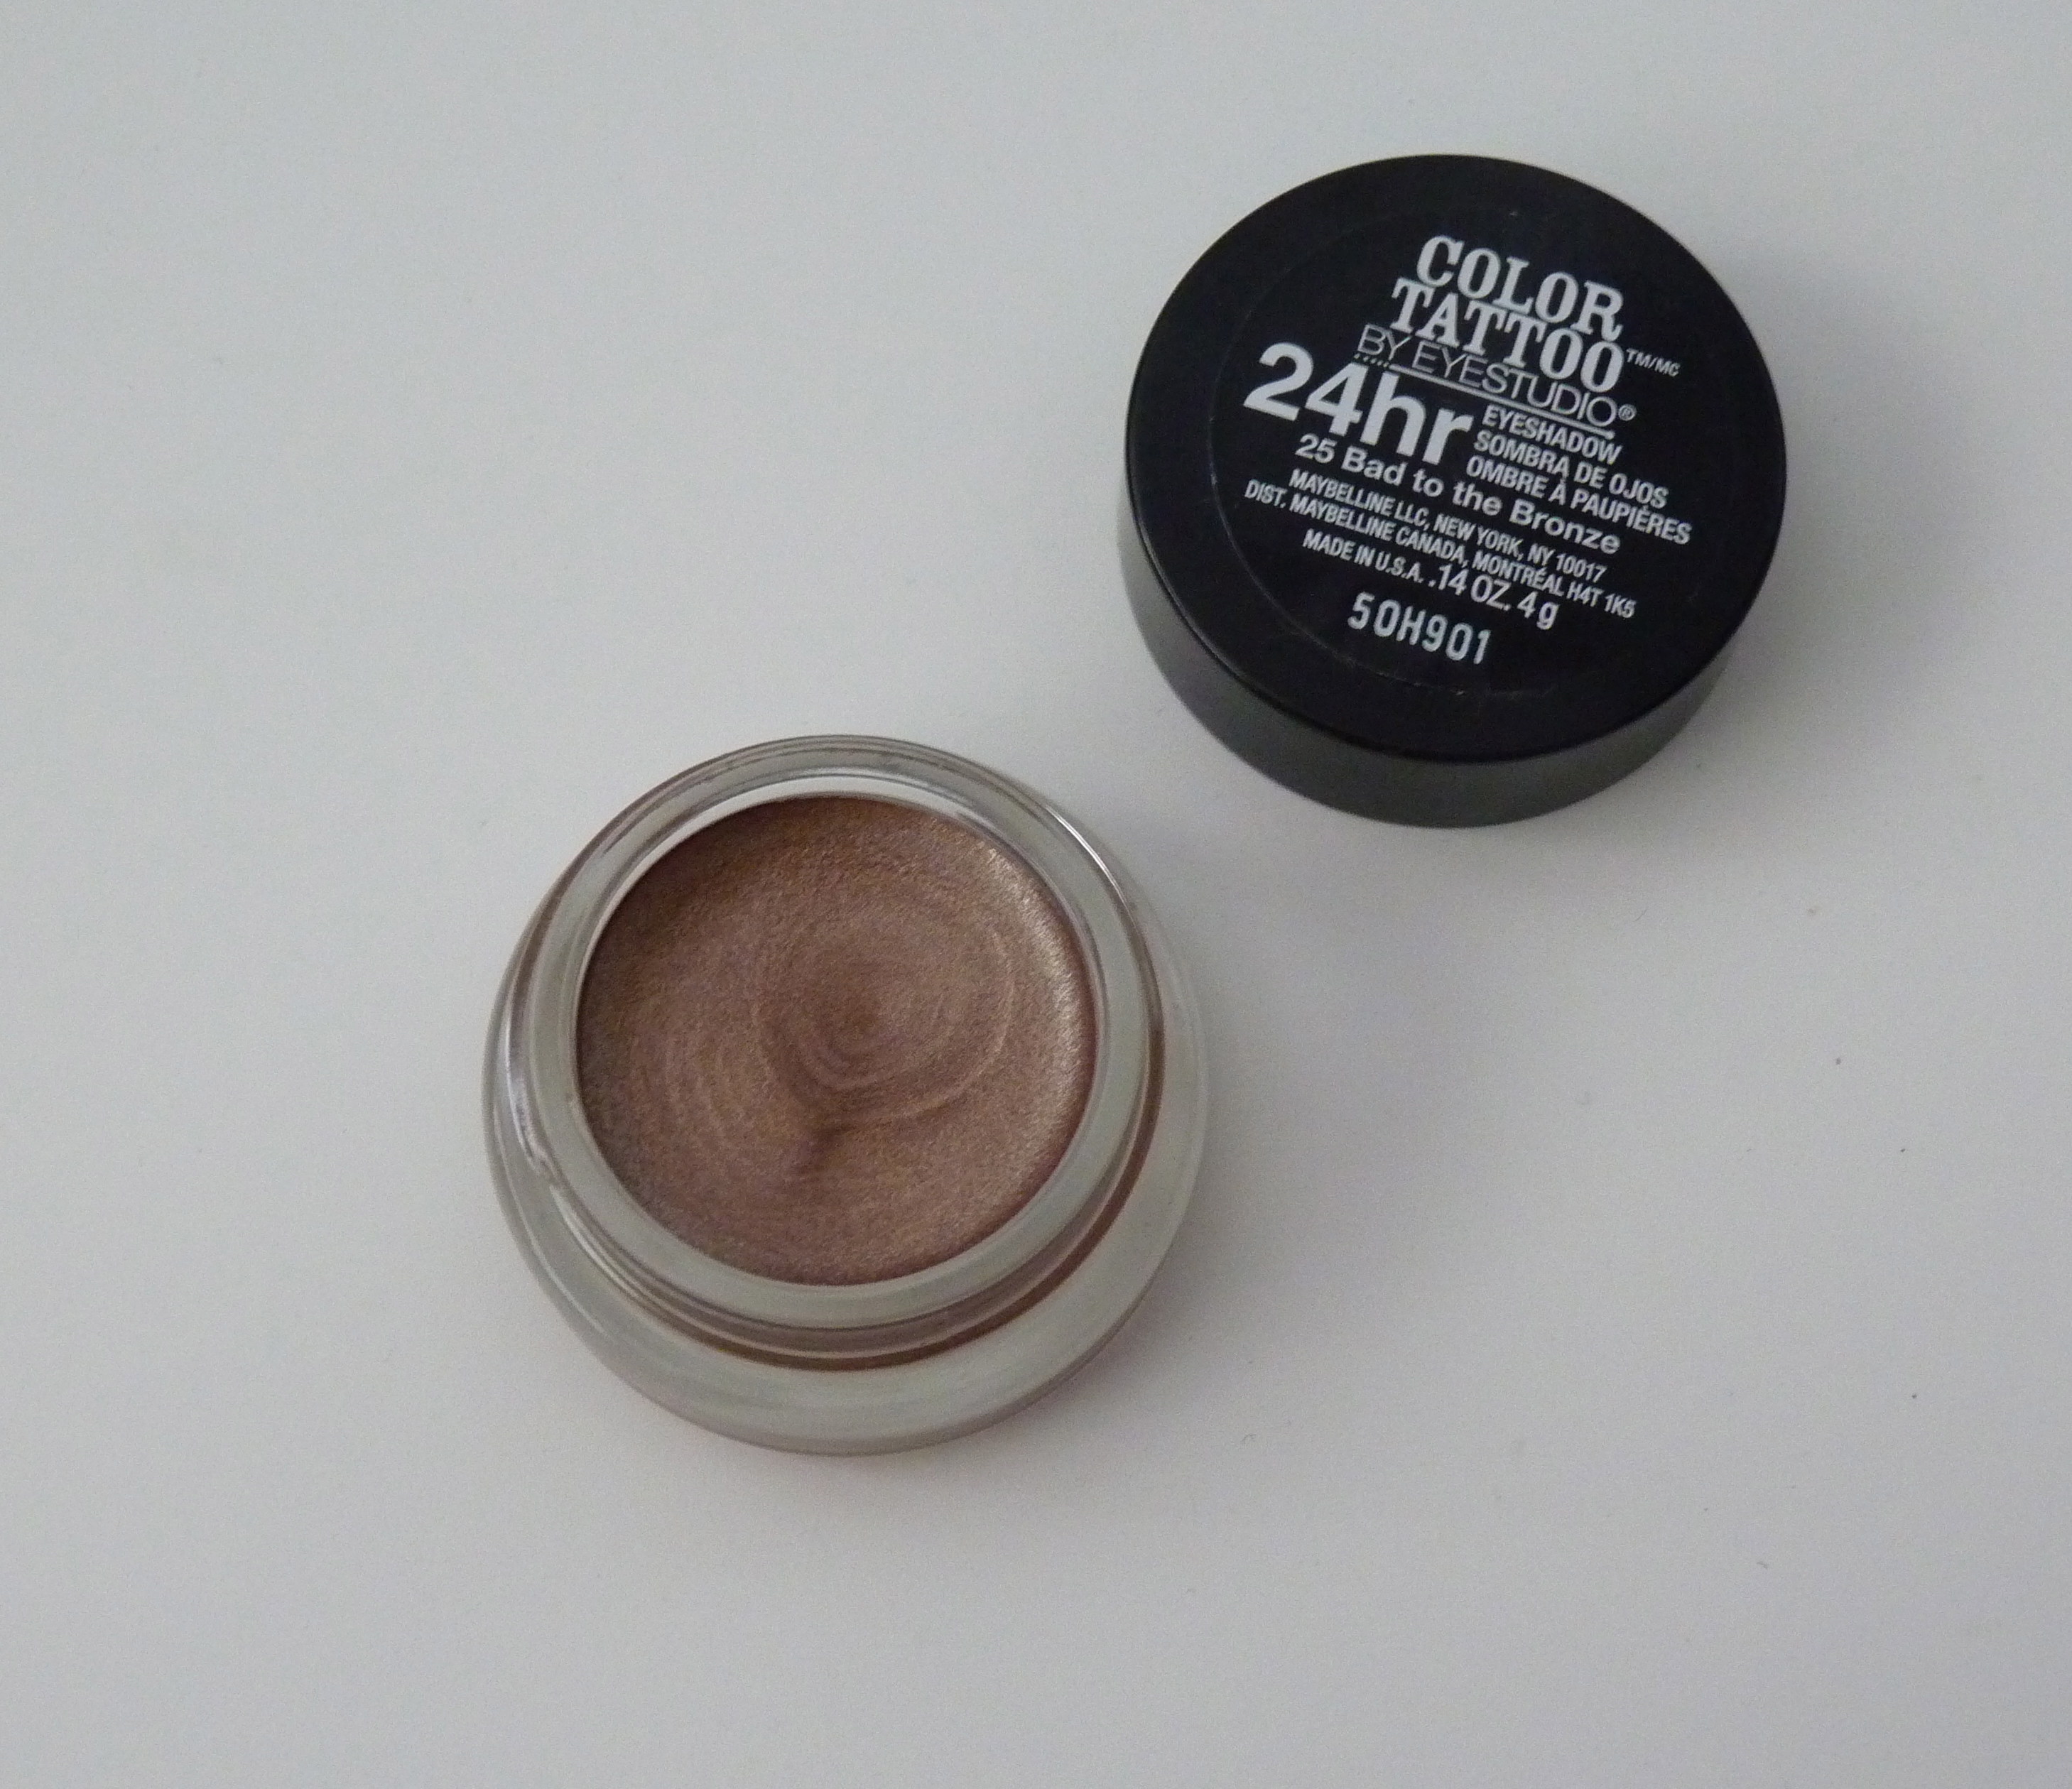 Maybelline Bad to the Bronze (#25) Color Tattoo 24 Hour Review, Photos, Swatches | The LAB of